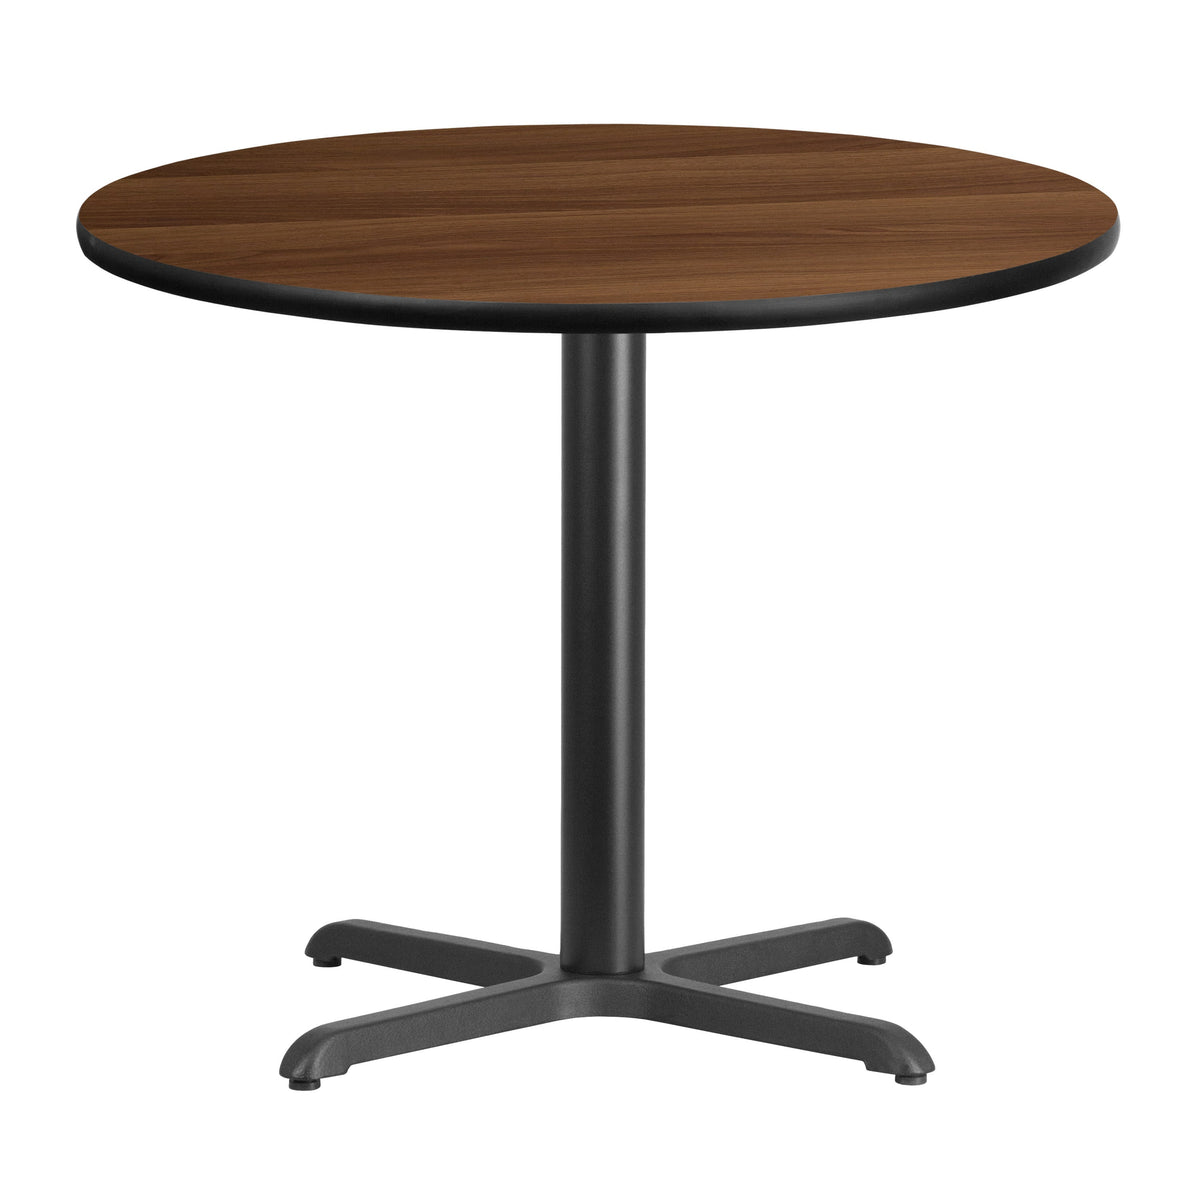 Walnut |#| 36inch Round Walnut Laminate Table Top with 30inch x 30inch Table Height Base